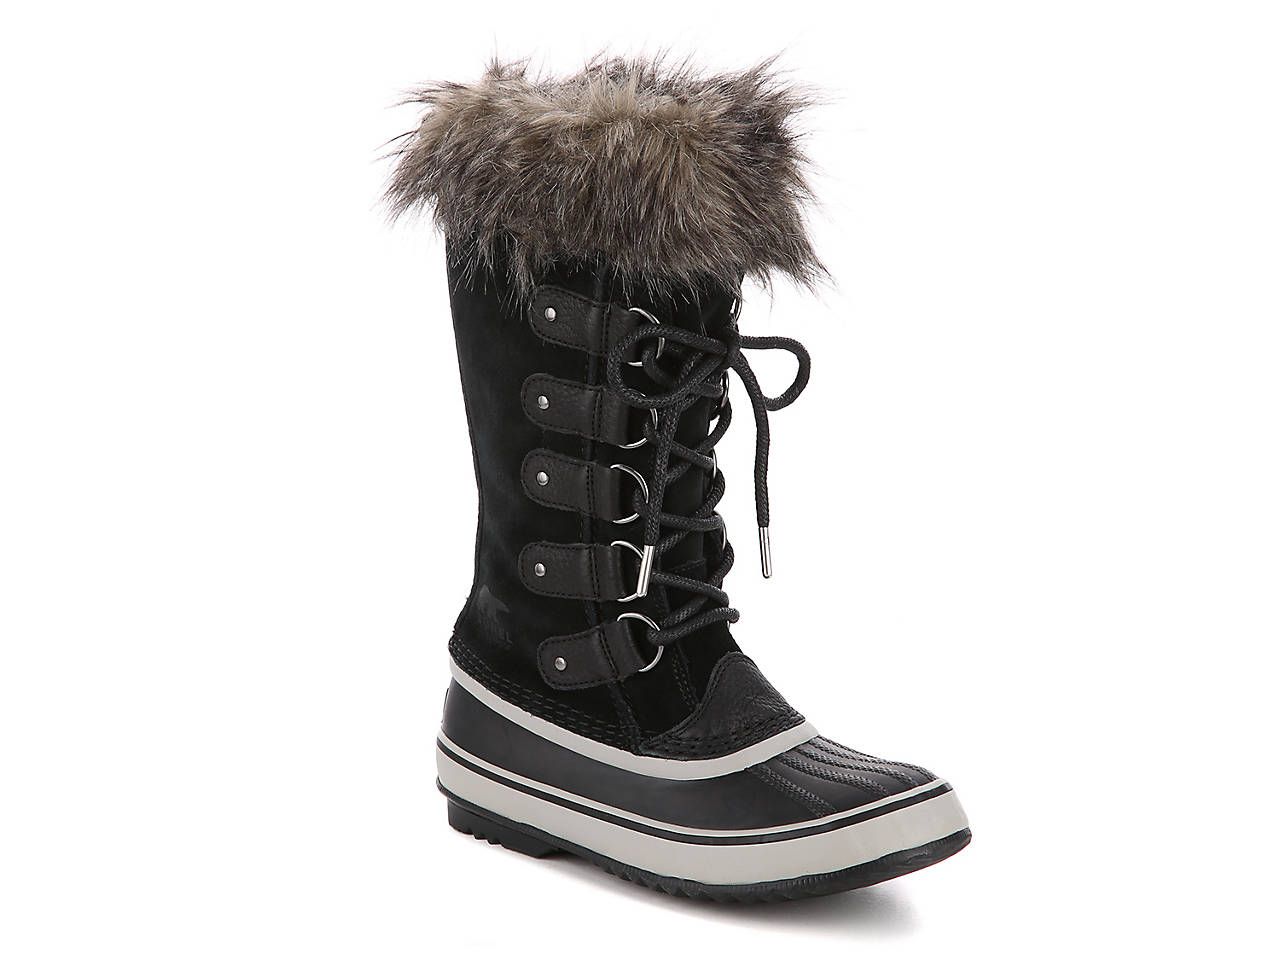 25% Off - Prices as Marked - Joan of Arctic Snow Boot | DSW